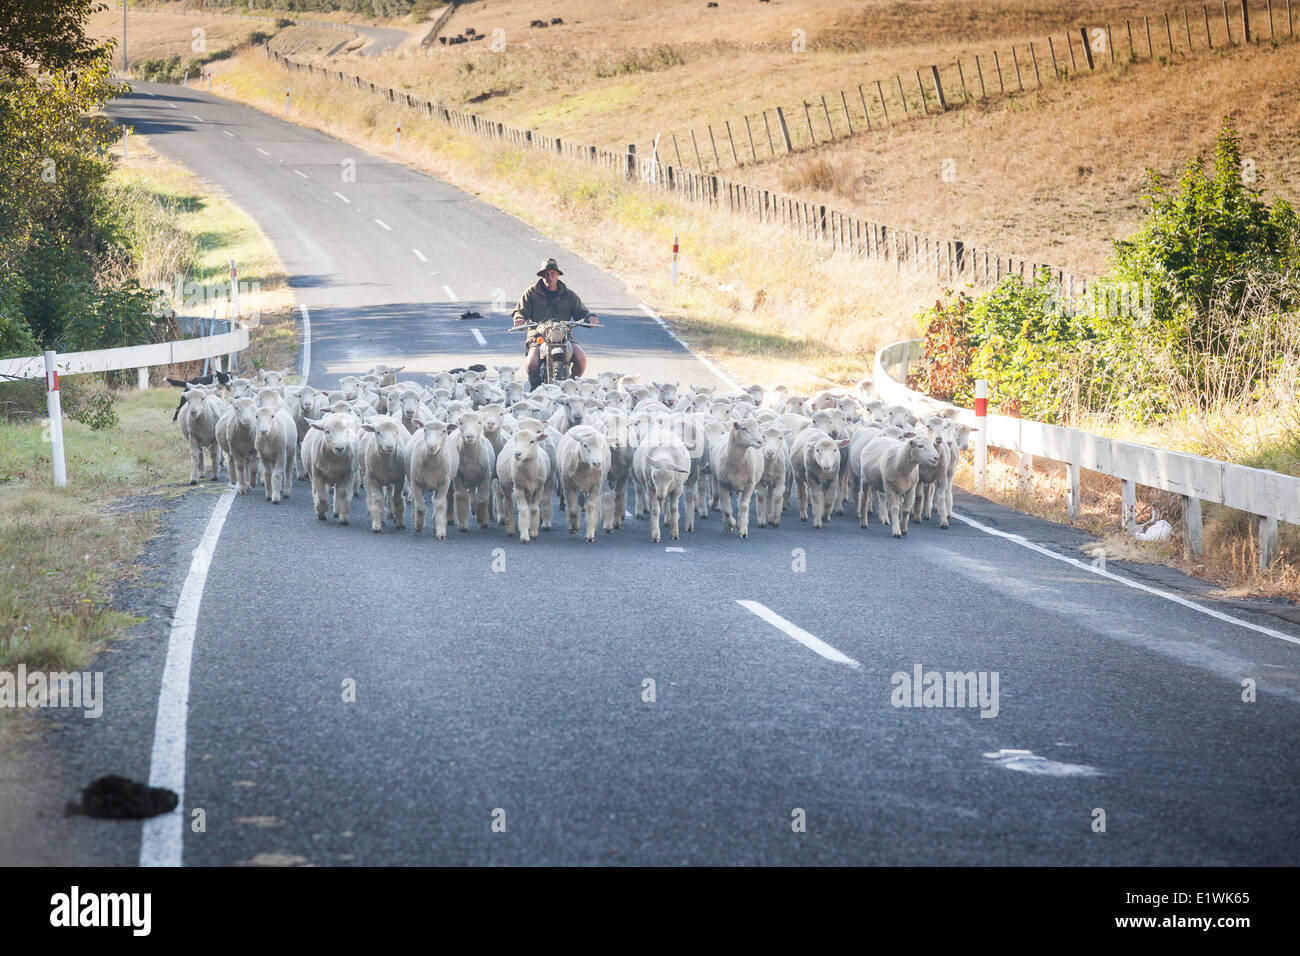 A flock of domestic sheep being herded down a road in Kai Iwi Beach, New Zealand Stock Photo